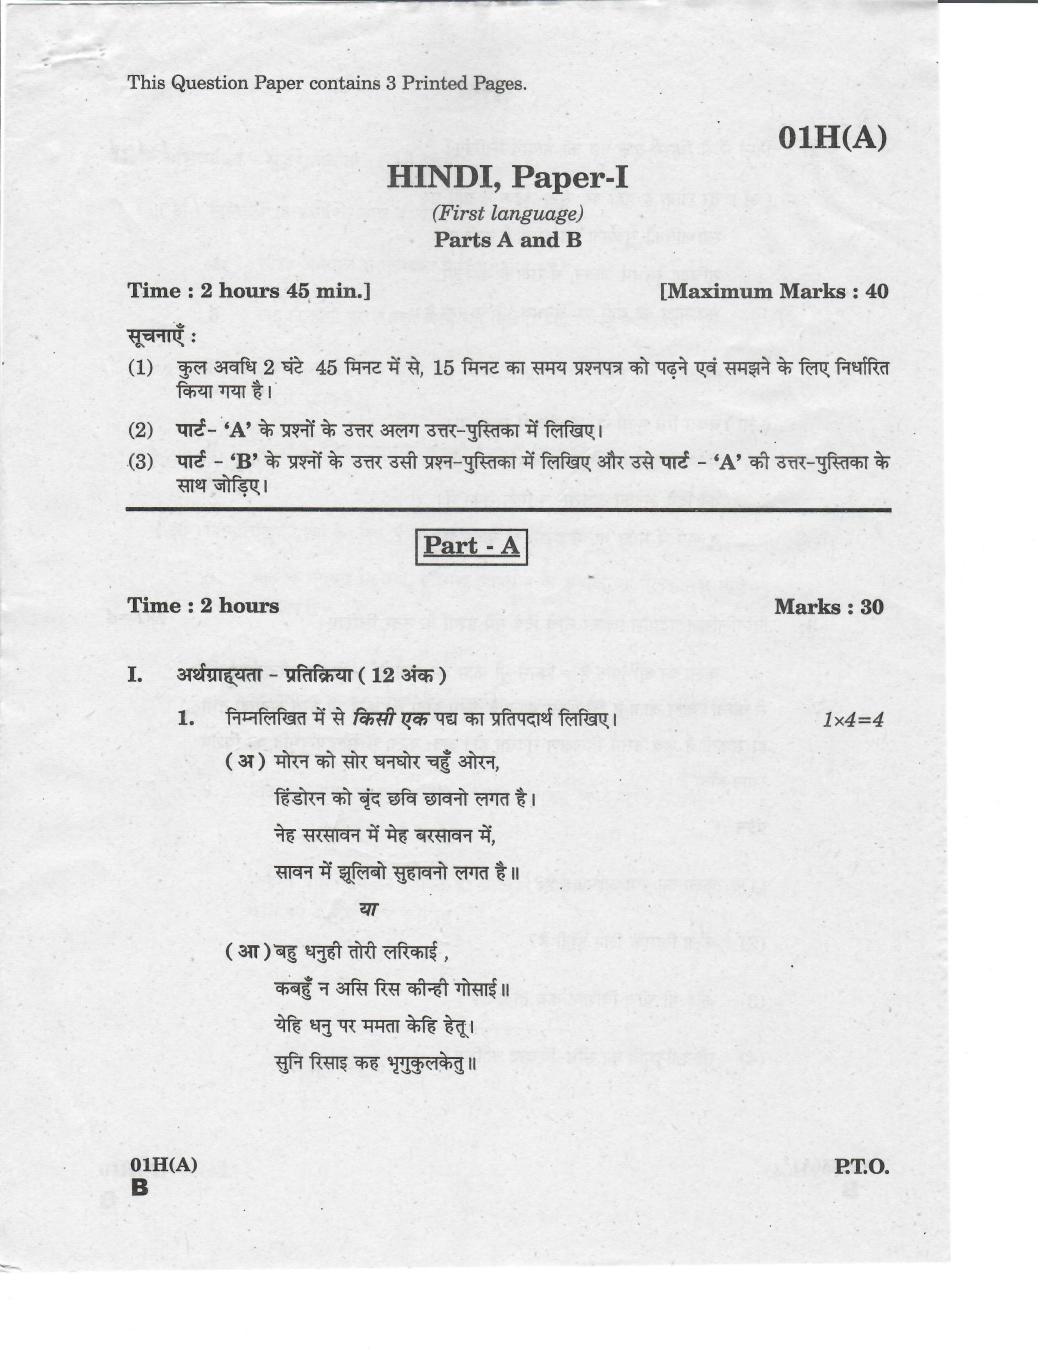 AP 10th Class Question Paper 2019 Hindi - Paper 1 (1st Language) - Page 1